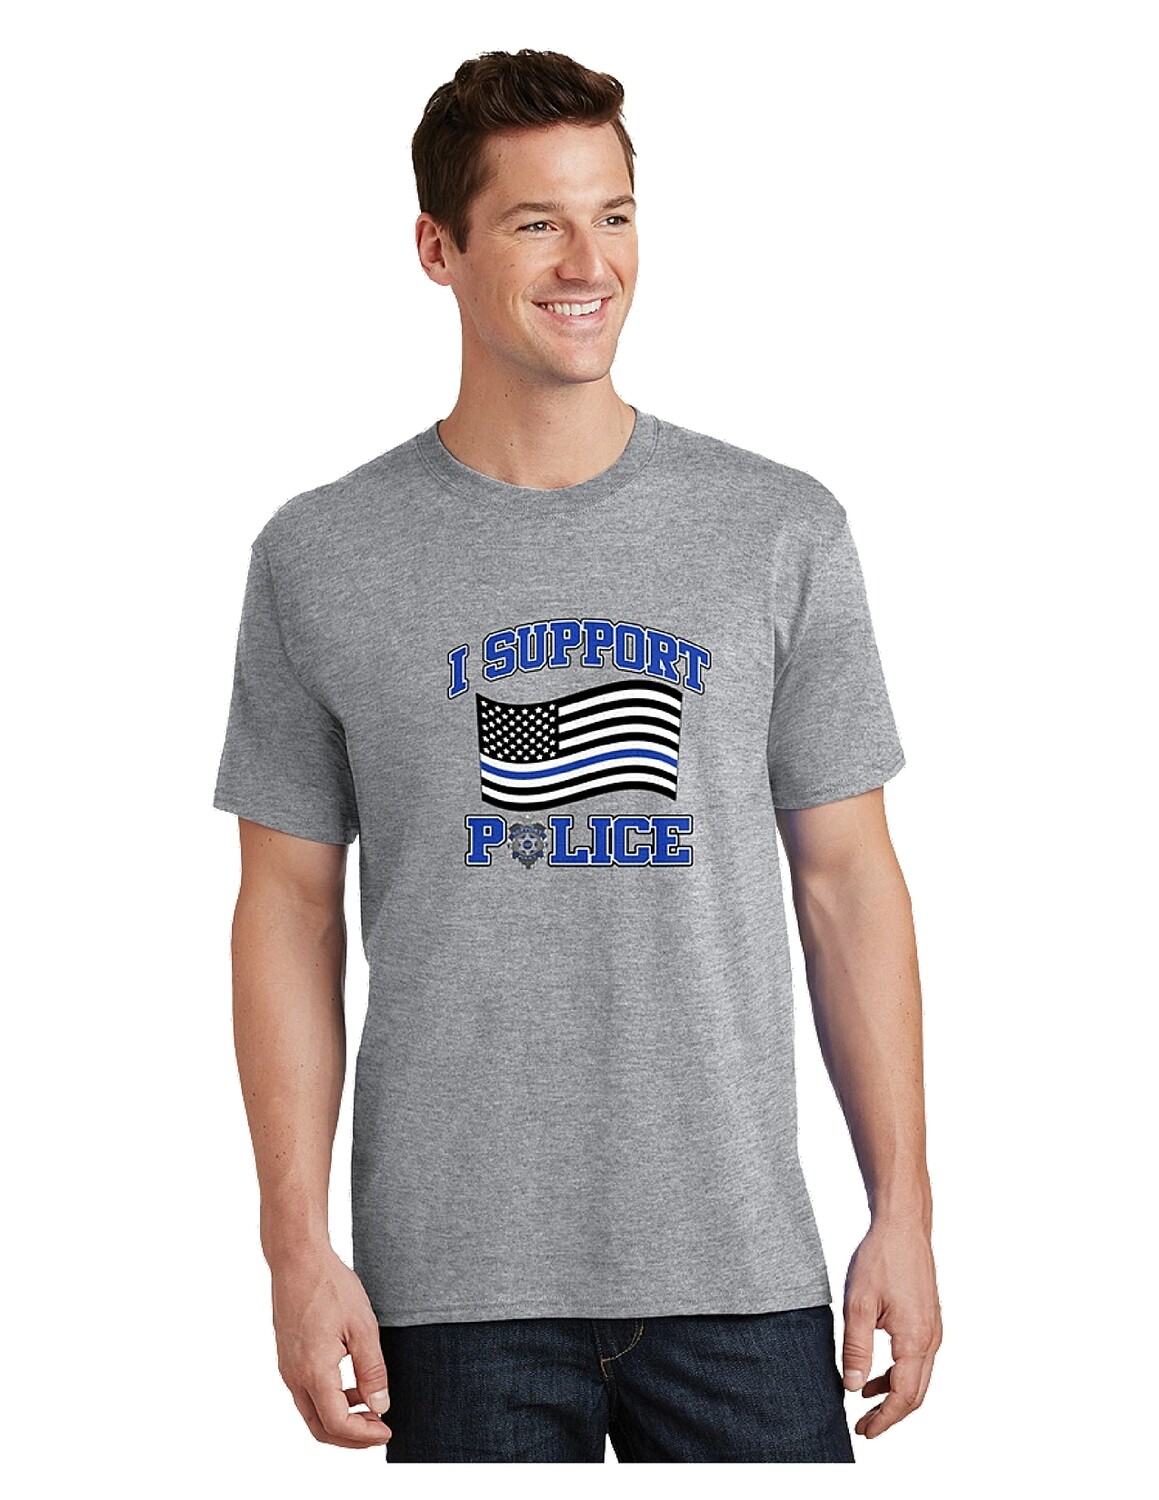 Men's I support Police Tee Shirt